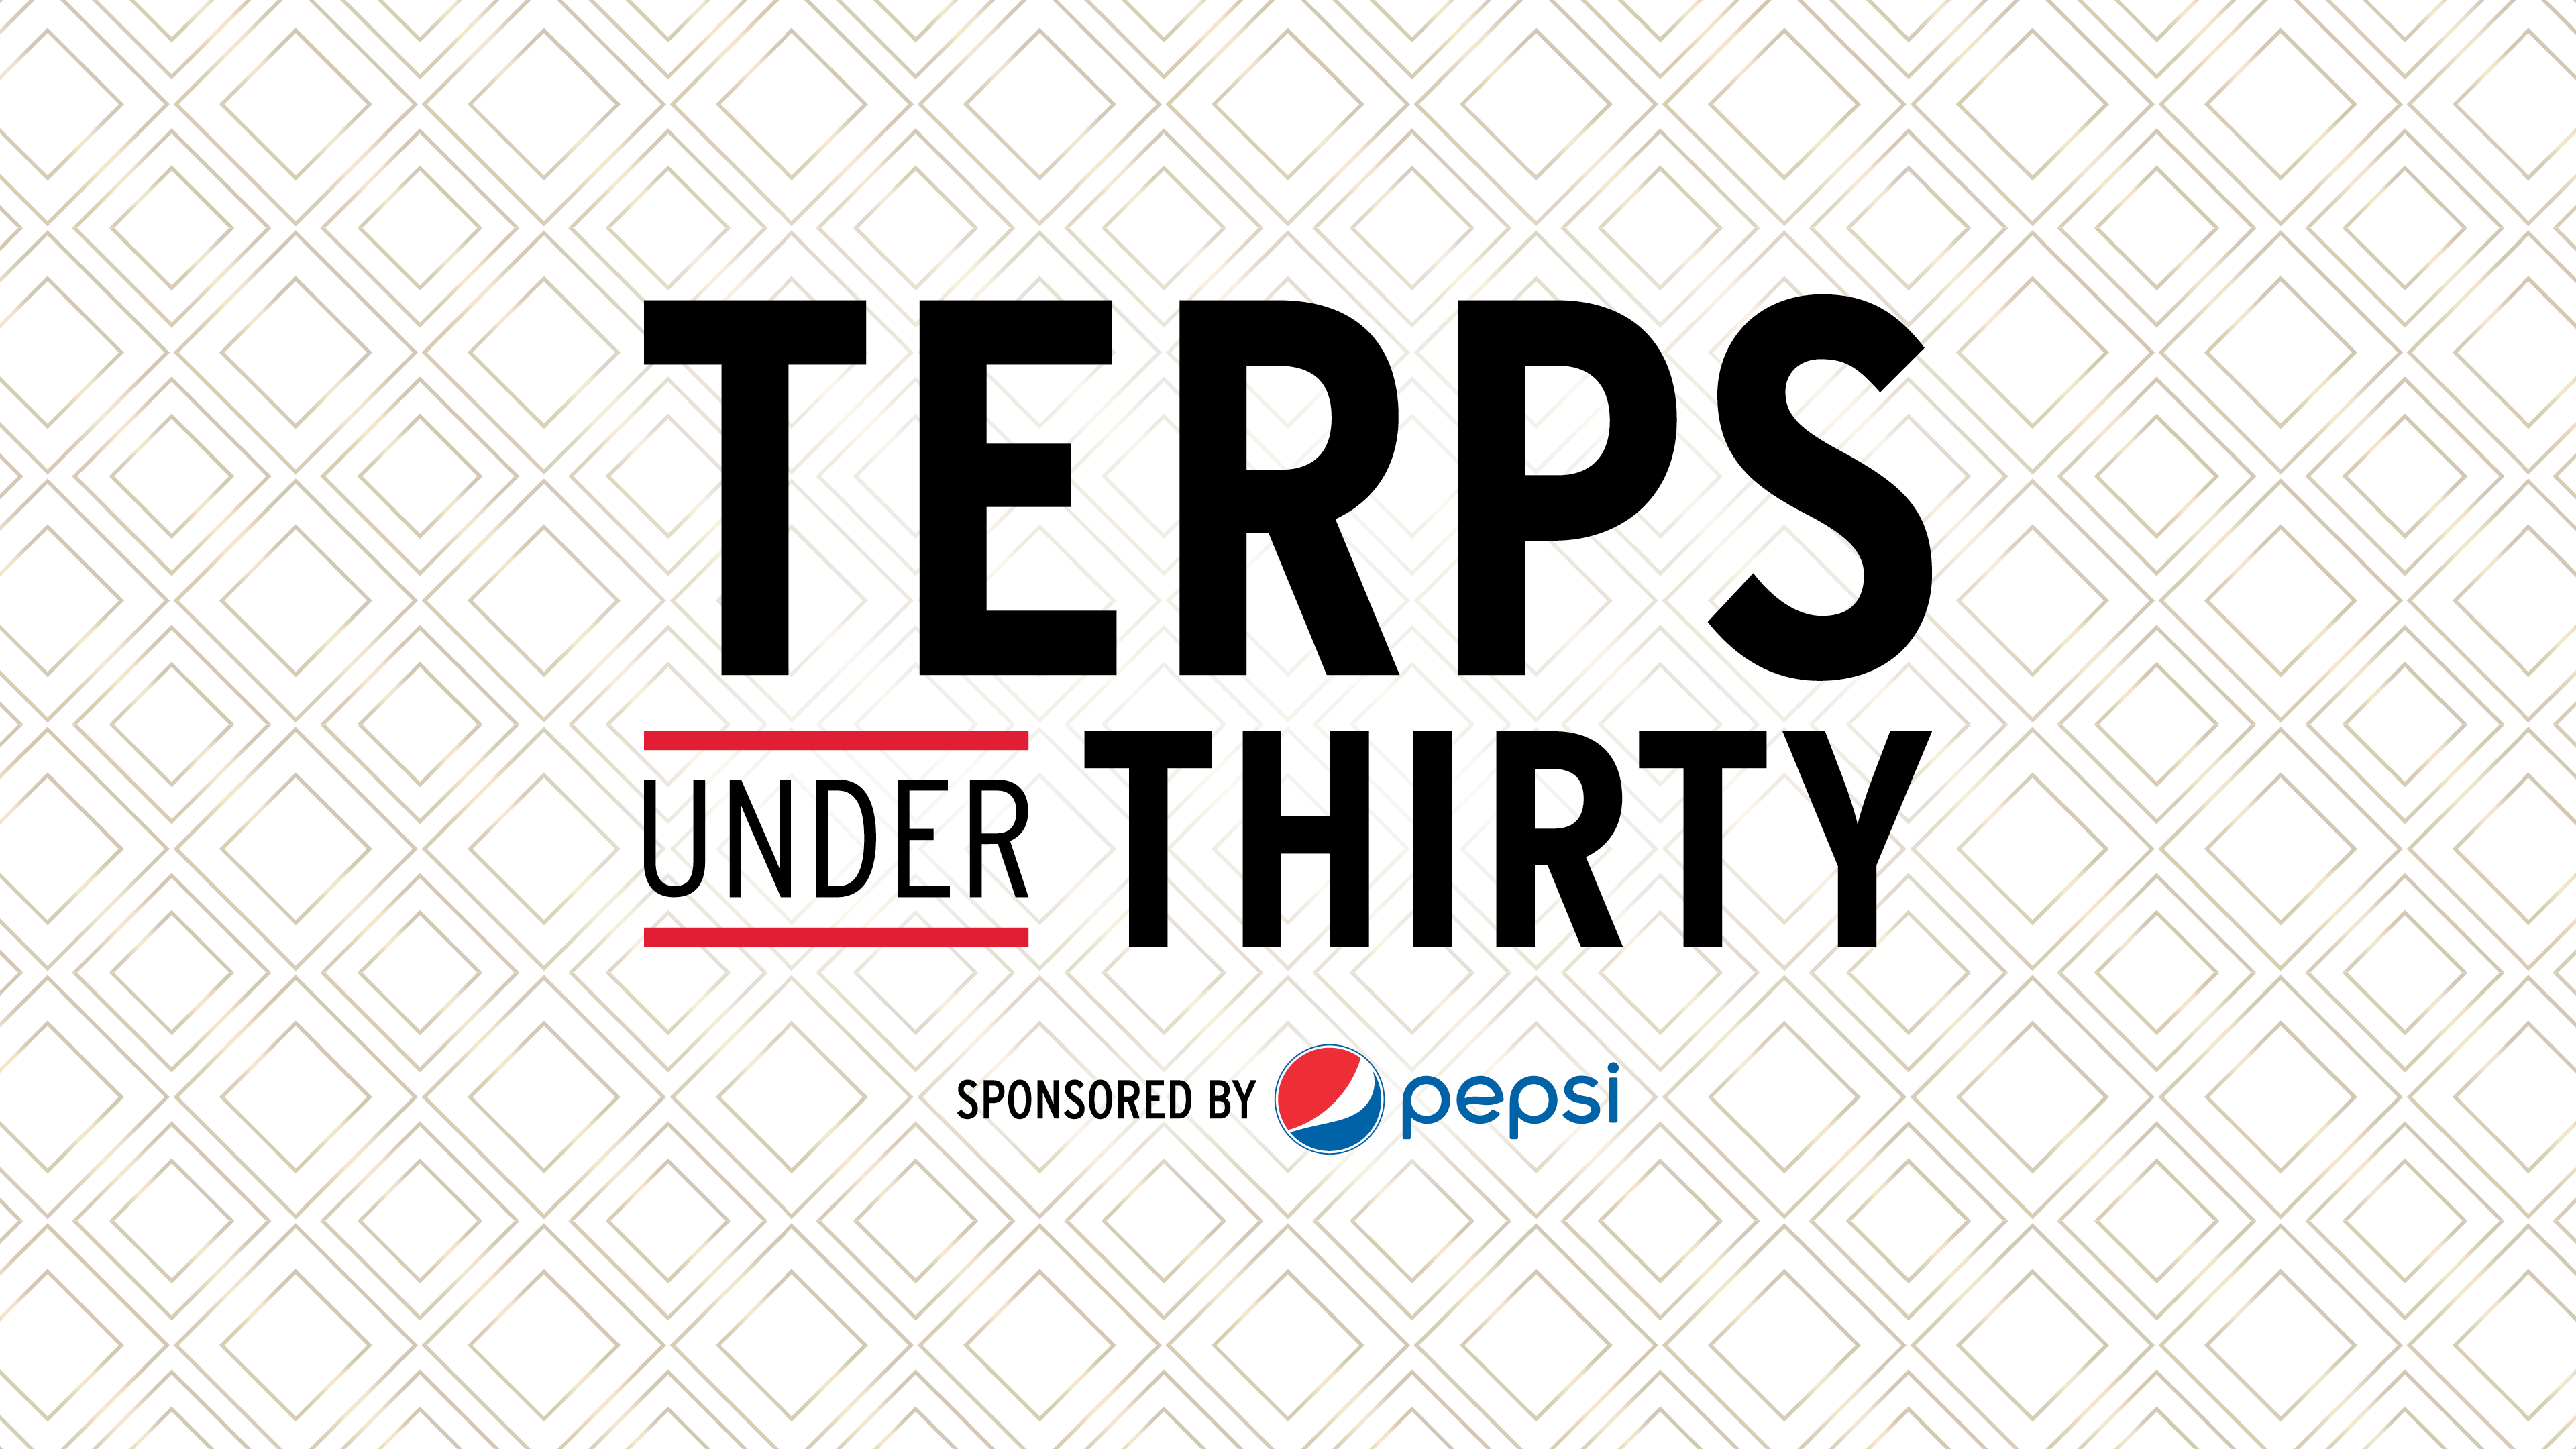 Terps Under 30. Sponsored by Pepsi.